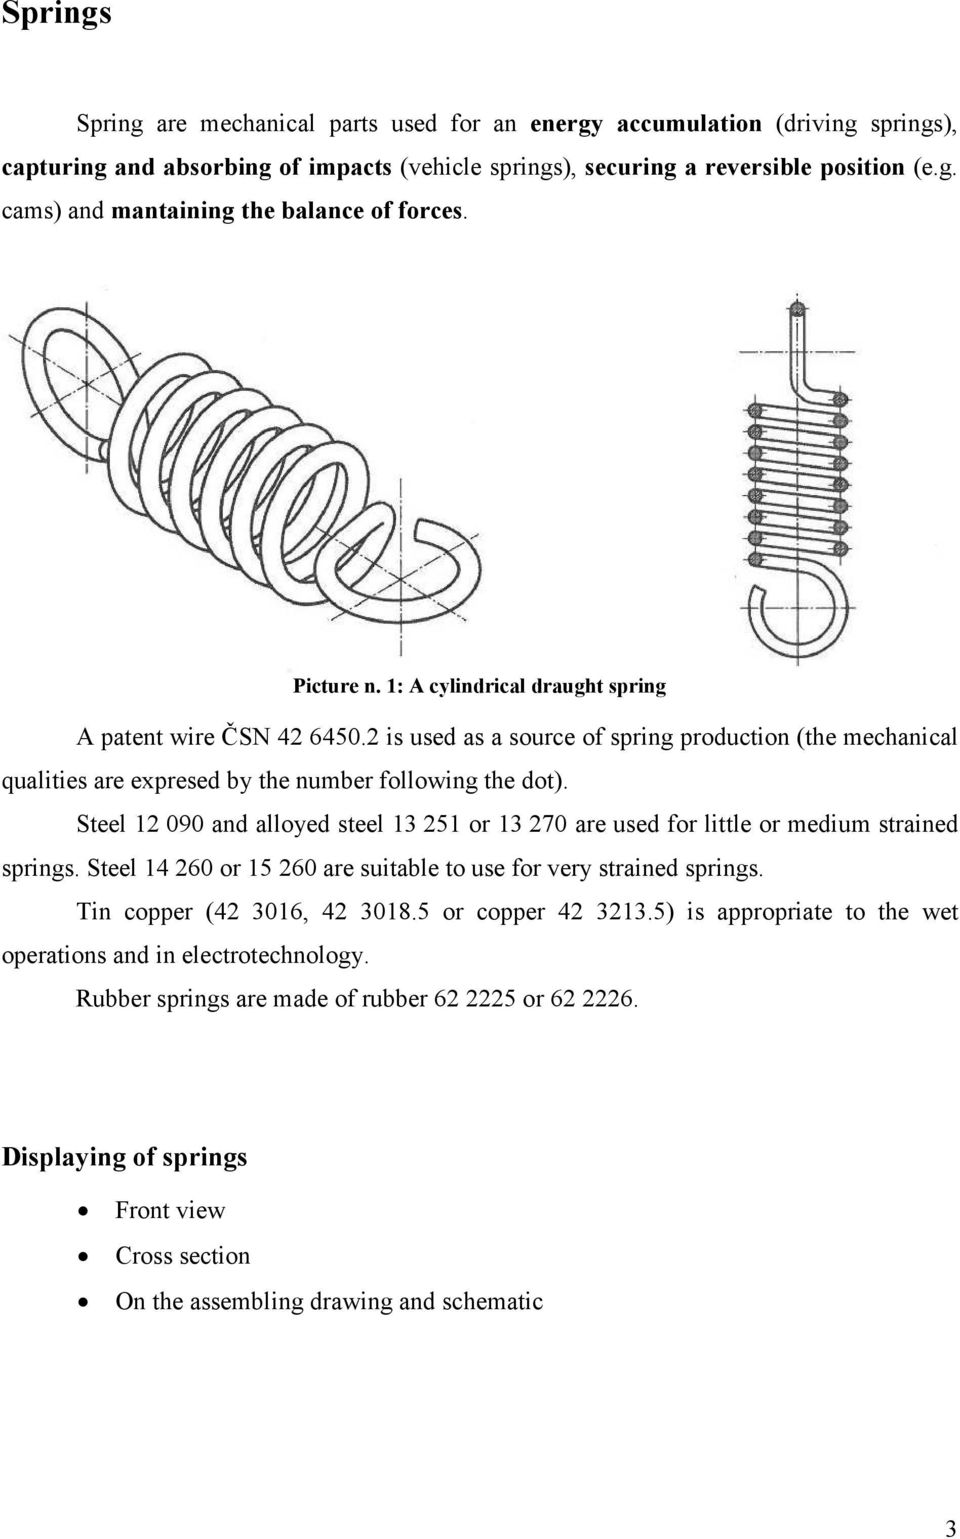 Steel 12 090 and alloyed steel 13 251 or 13 270 are used for little or medium strained springs. Steel 14 260 or 15 260 are suitable to use for very strained springs. Tin copper (42 3016, 42 3018.